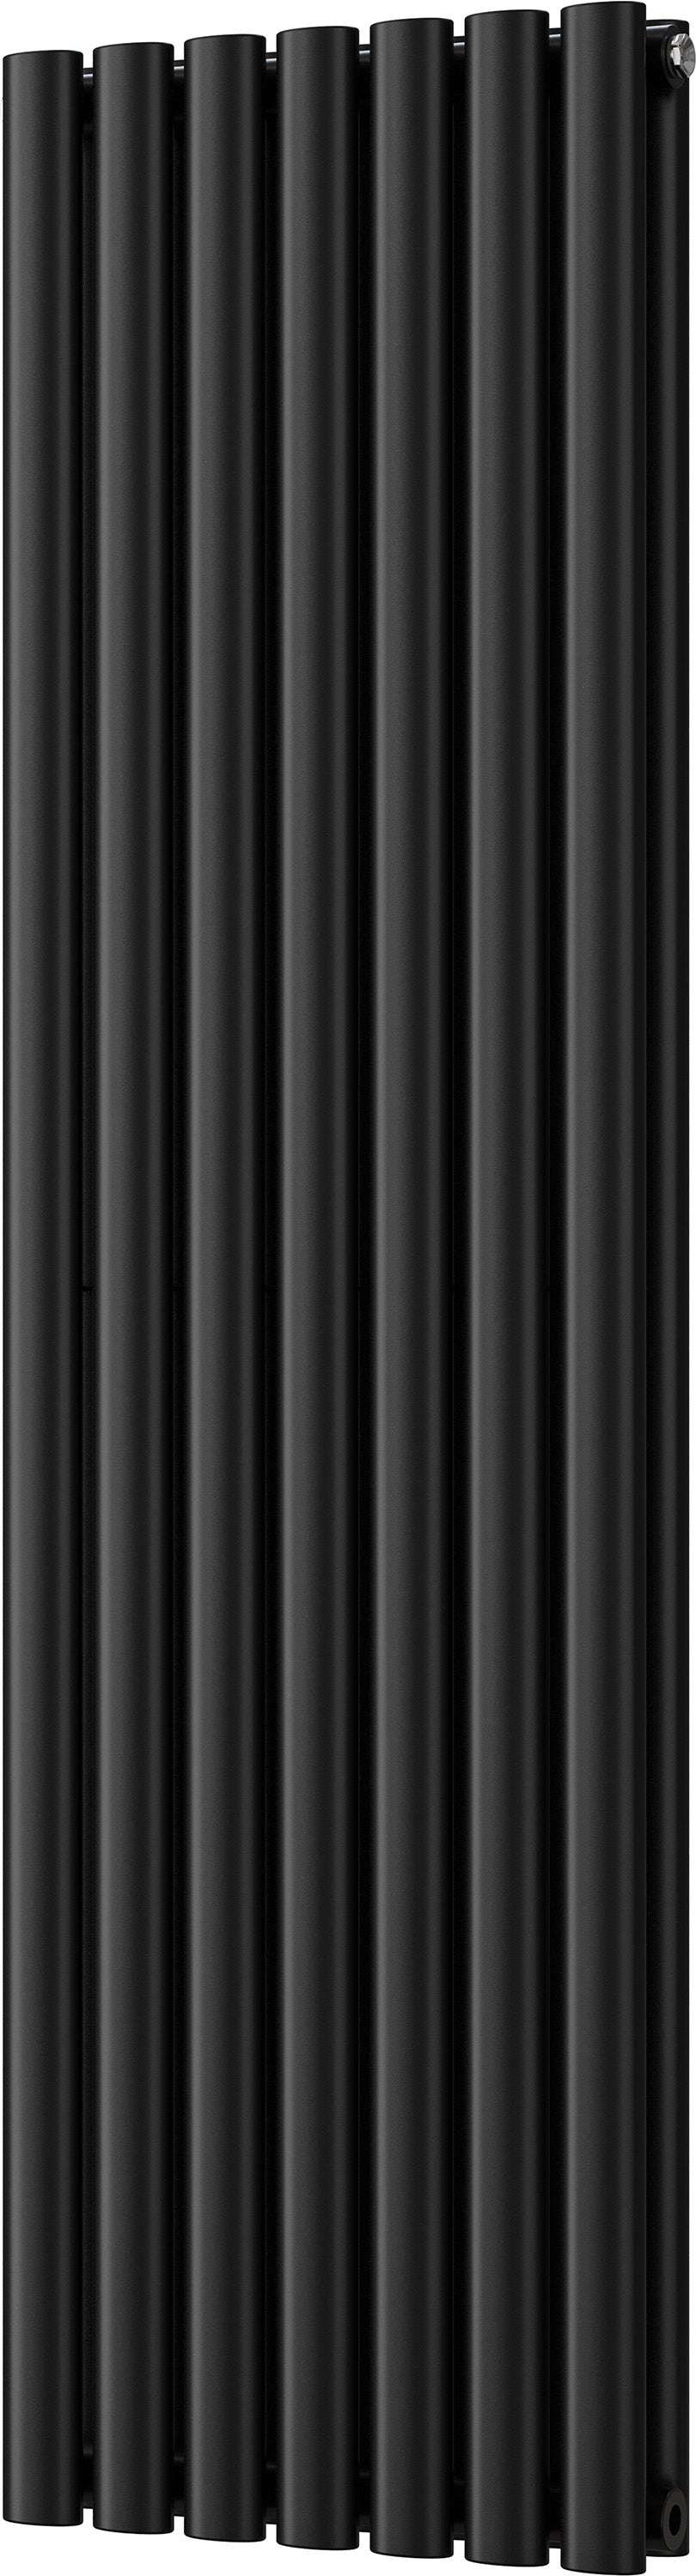 Omeara - Black Vertical Radiator H1400mm x W406mm Double Panel